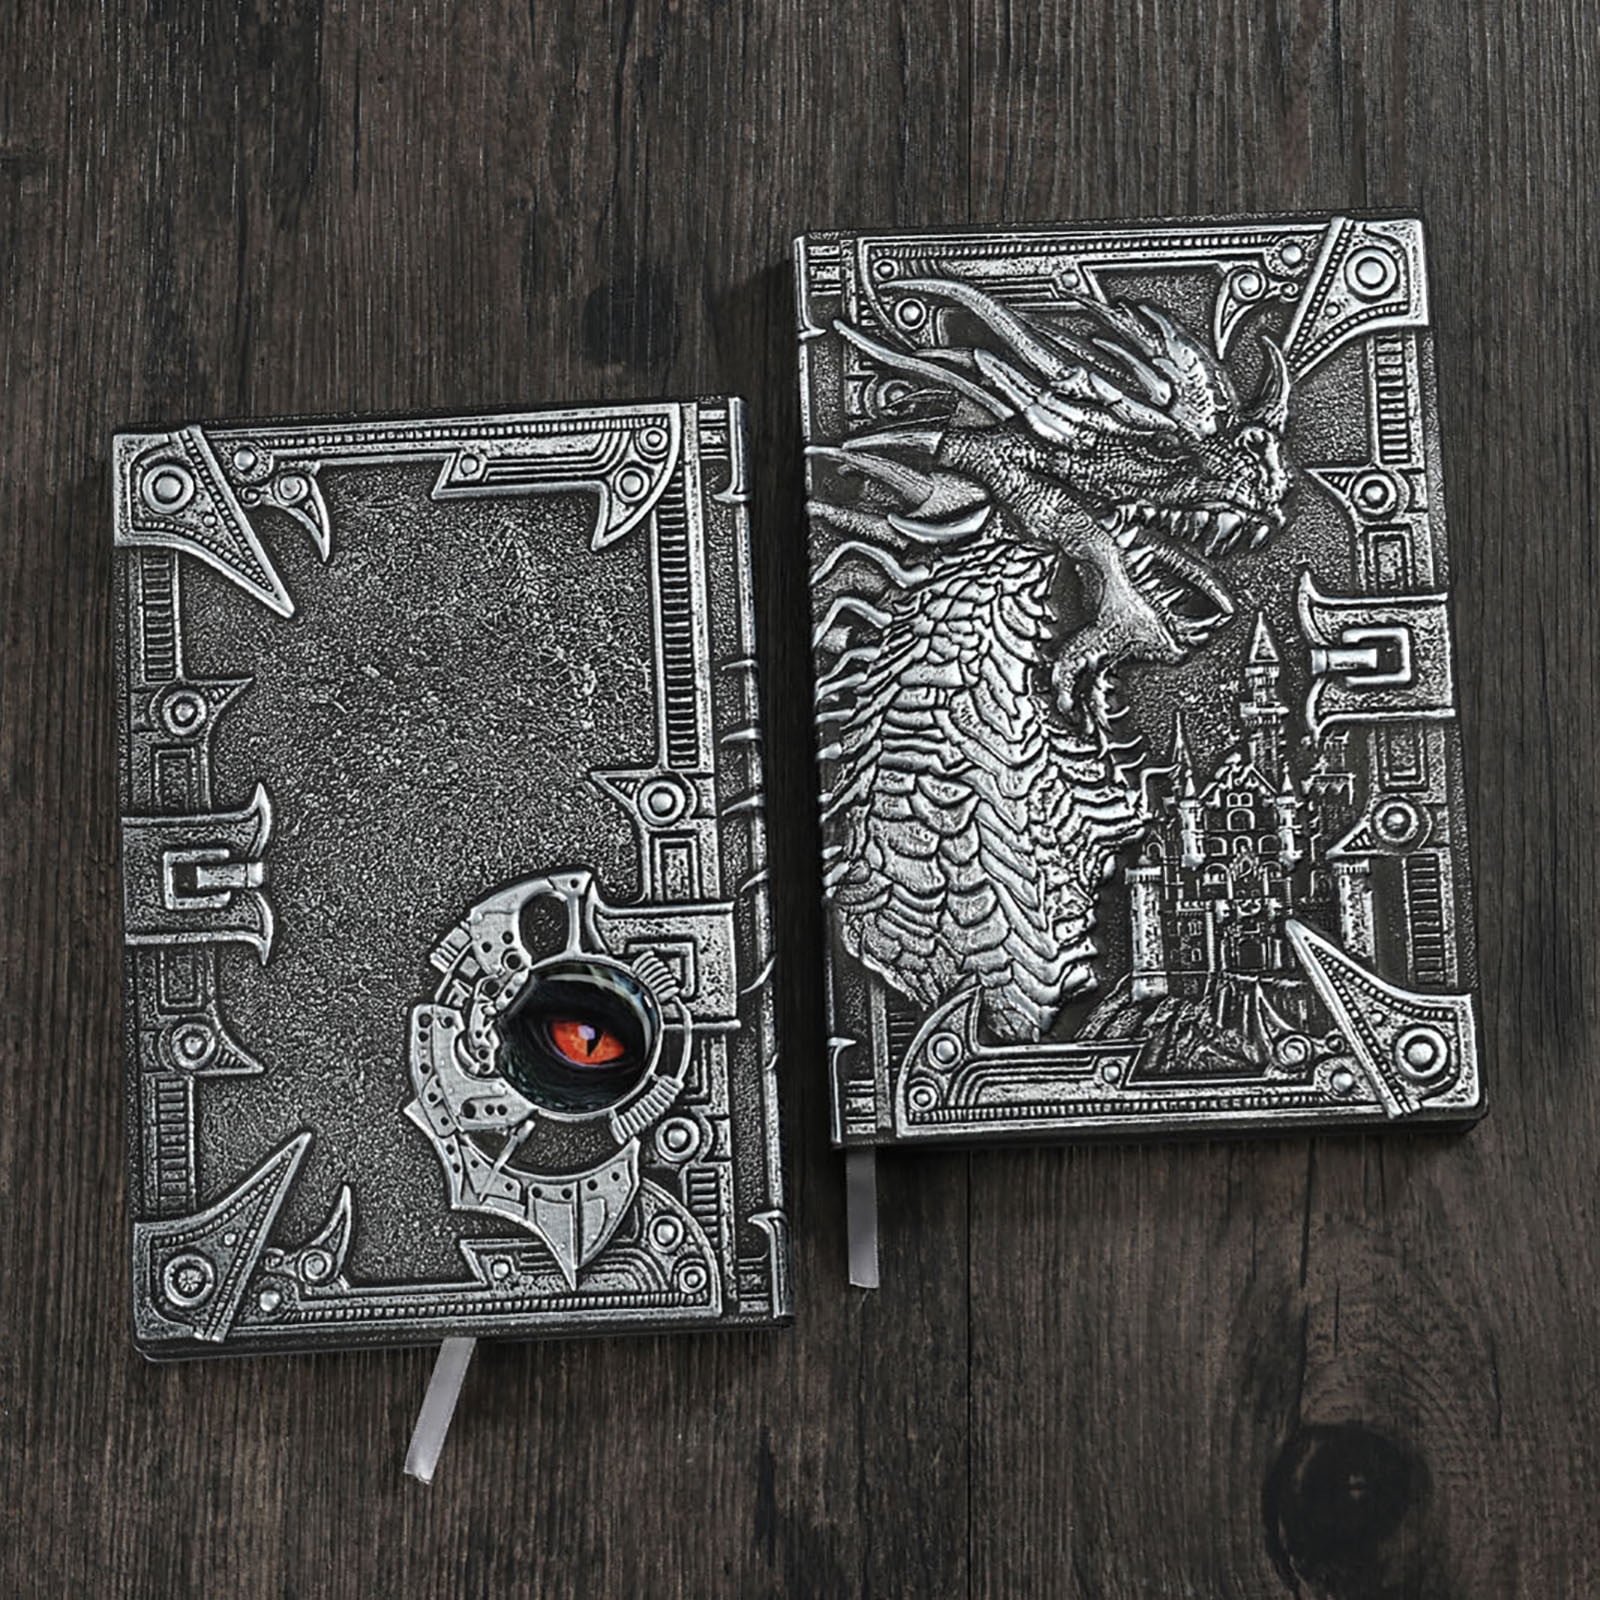  ZYWJUGE Dragon Journal Notebook, Dungeons and Dragons